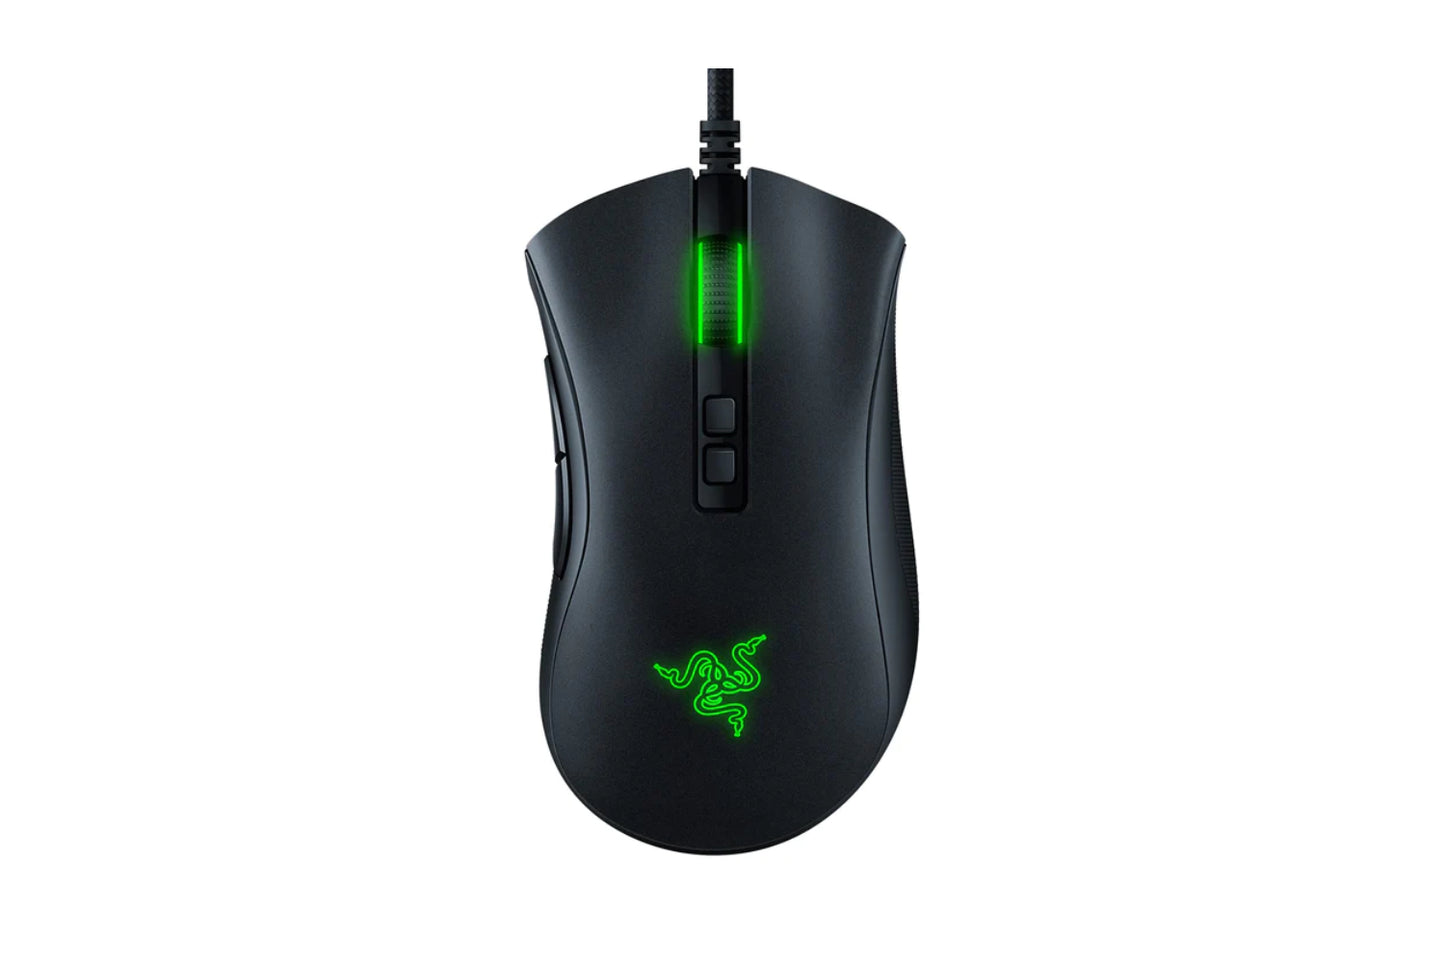 Razer DeathAdder V2 Wired Gaming Mouse | 8 Programmable Buttons | 20,000 DPI Optical Sensor - Chroma RGB Lighting - Classic Black - RZ01-03210100-R3M1-MOUSE-RAZER-computerspace